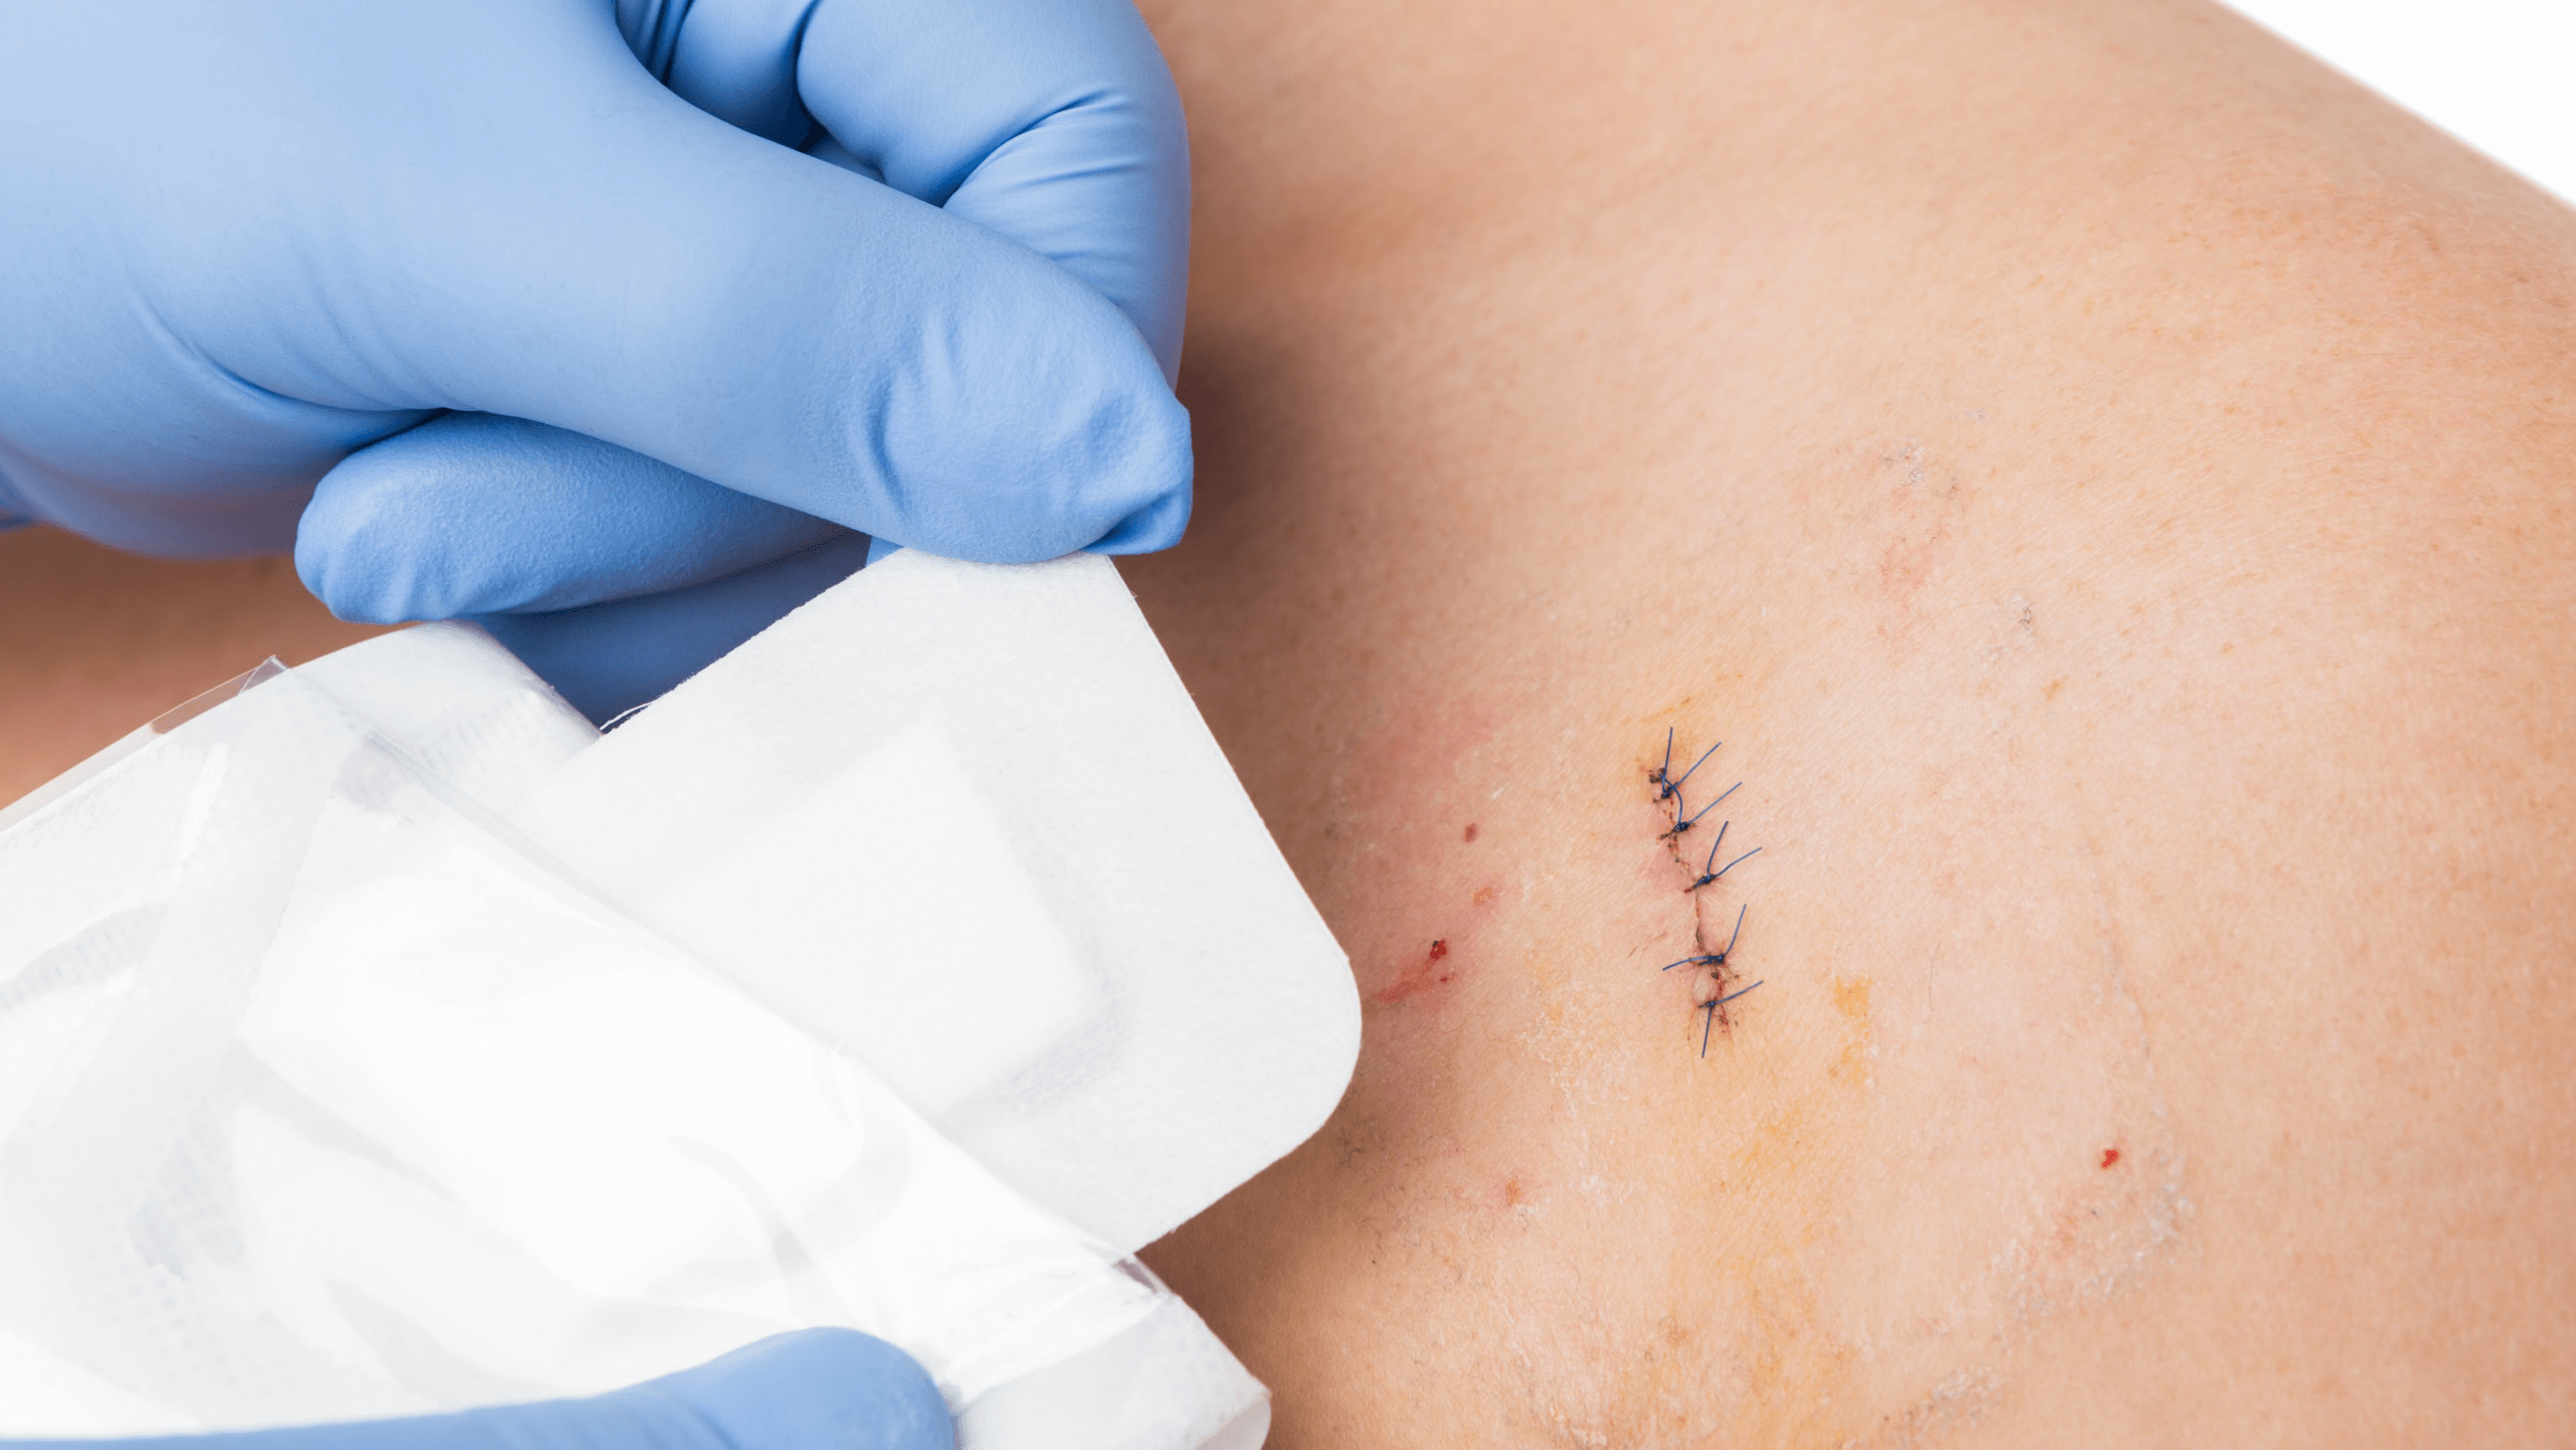 What You Should Do If Your Stitches Start To Itch